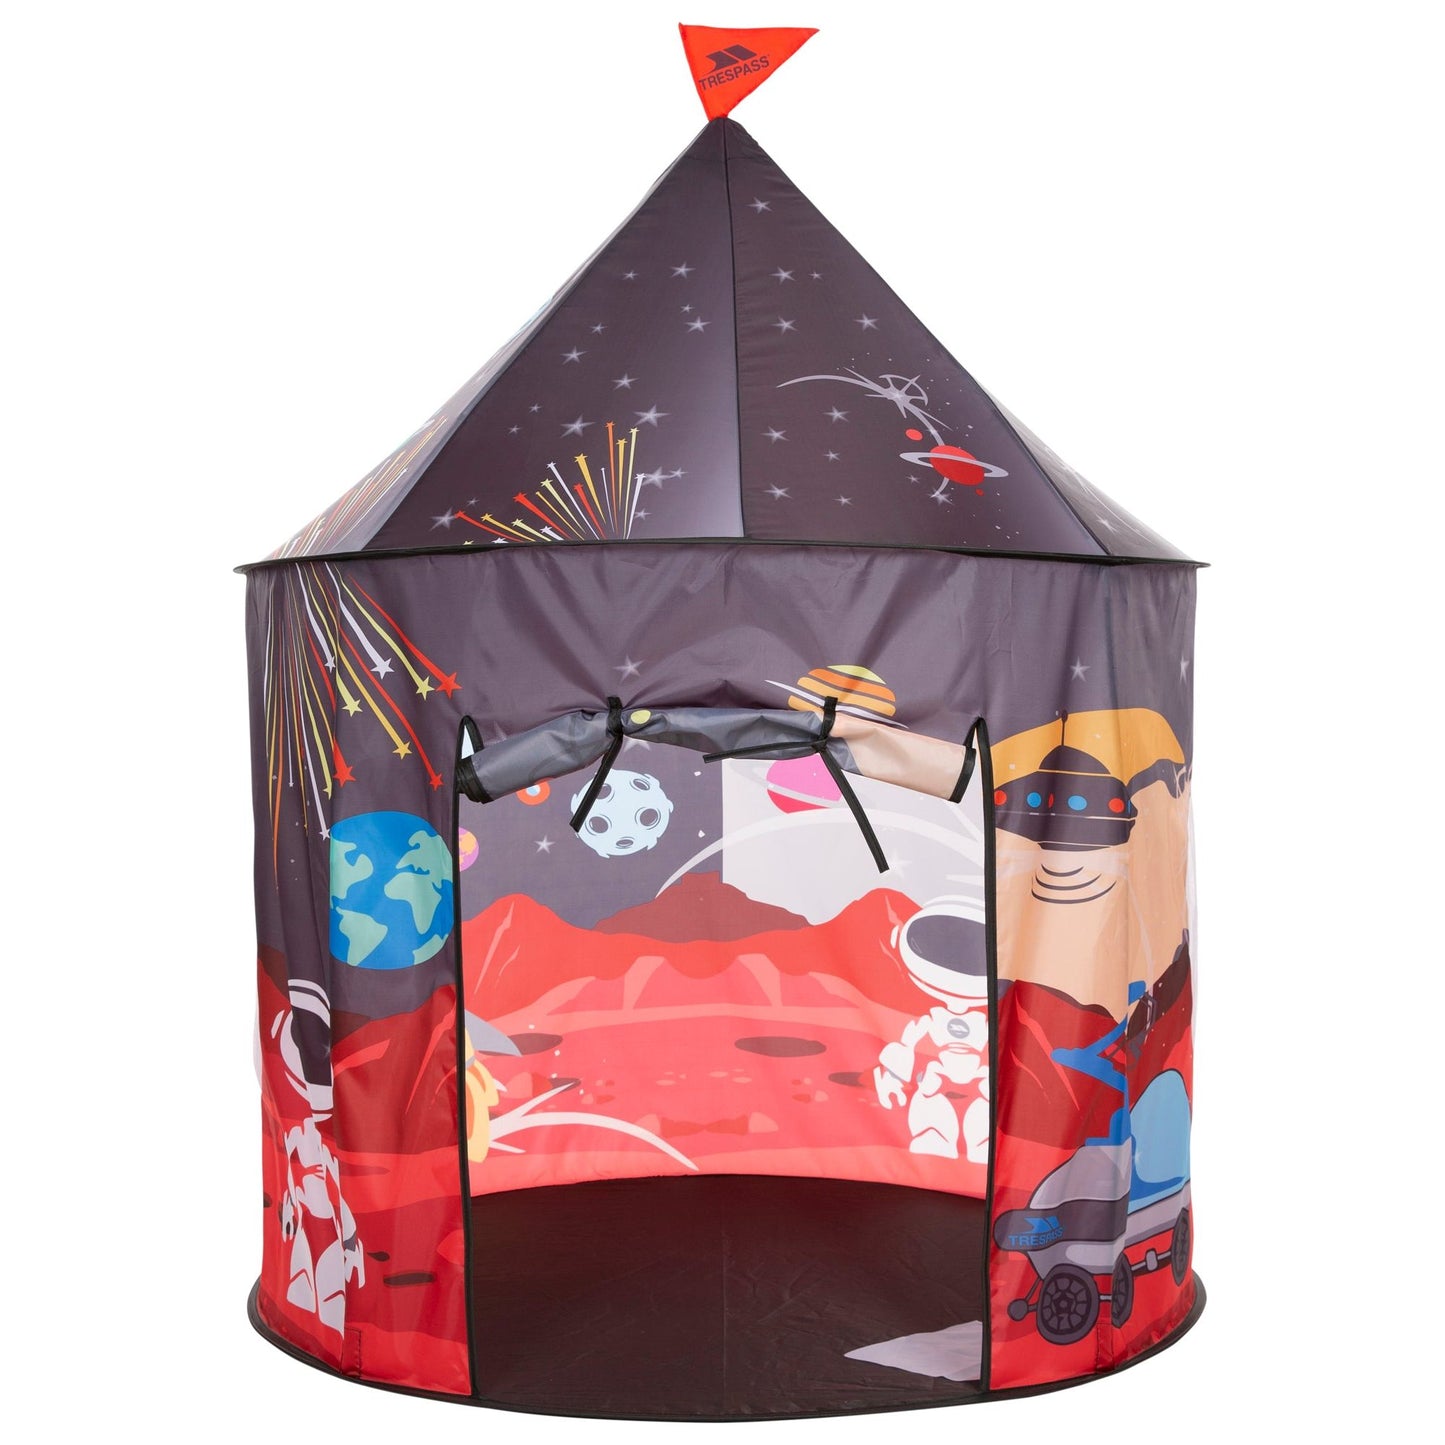 Chateau Kids' Indoor and Outdoor Play Tent - Space Print